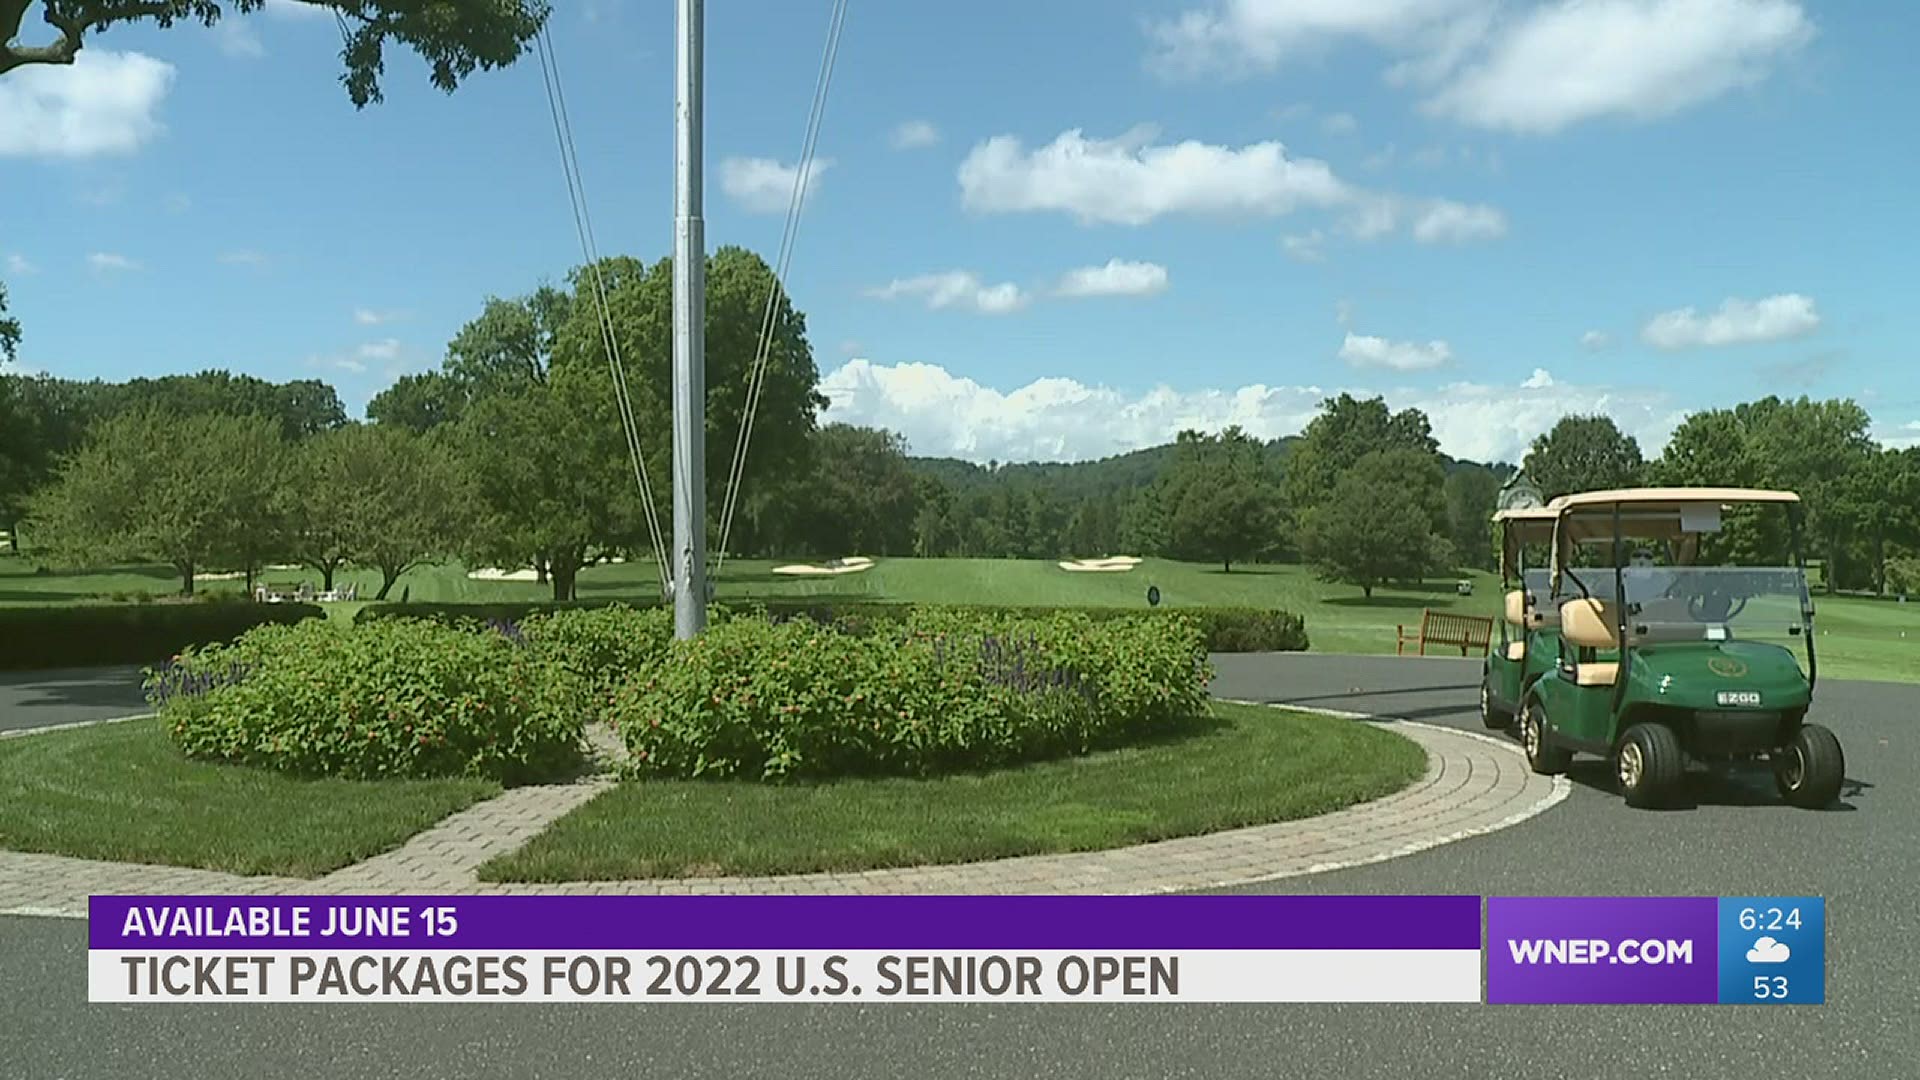 Ticket packages for 2022 US Senior Open at Saucon Valley available on June 15.